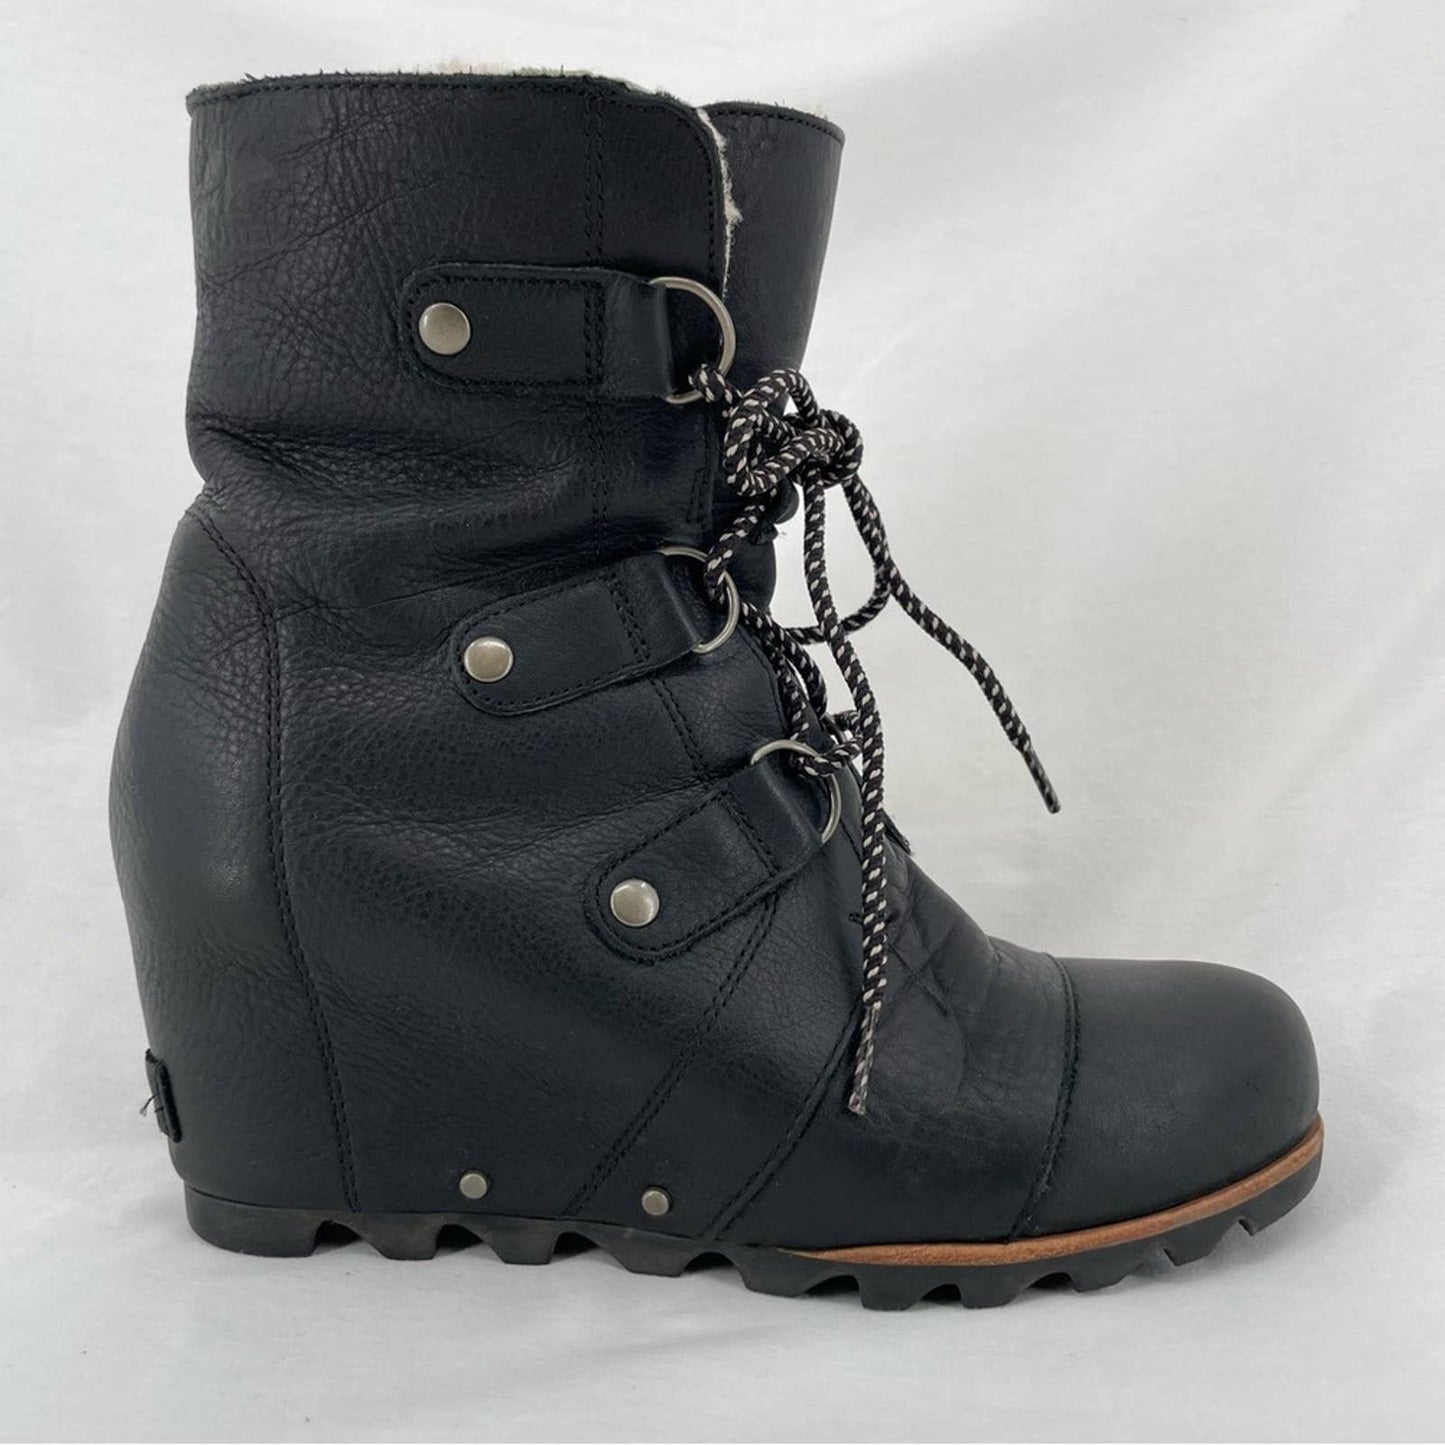 Sorel Black Joan of Arctic Wedge Real Shearling Trim Leather Mid Style Boots Size 9.5